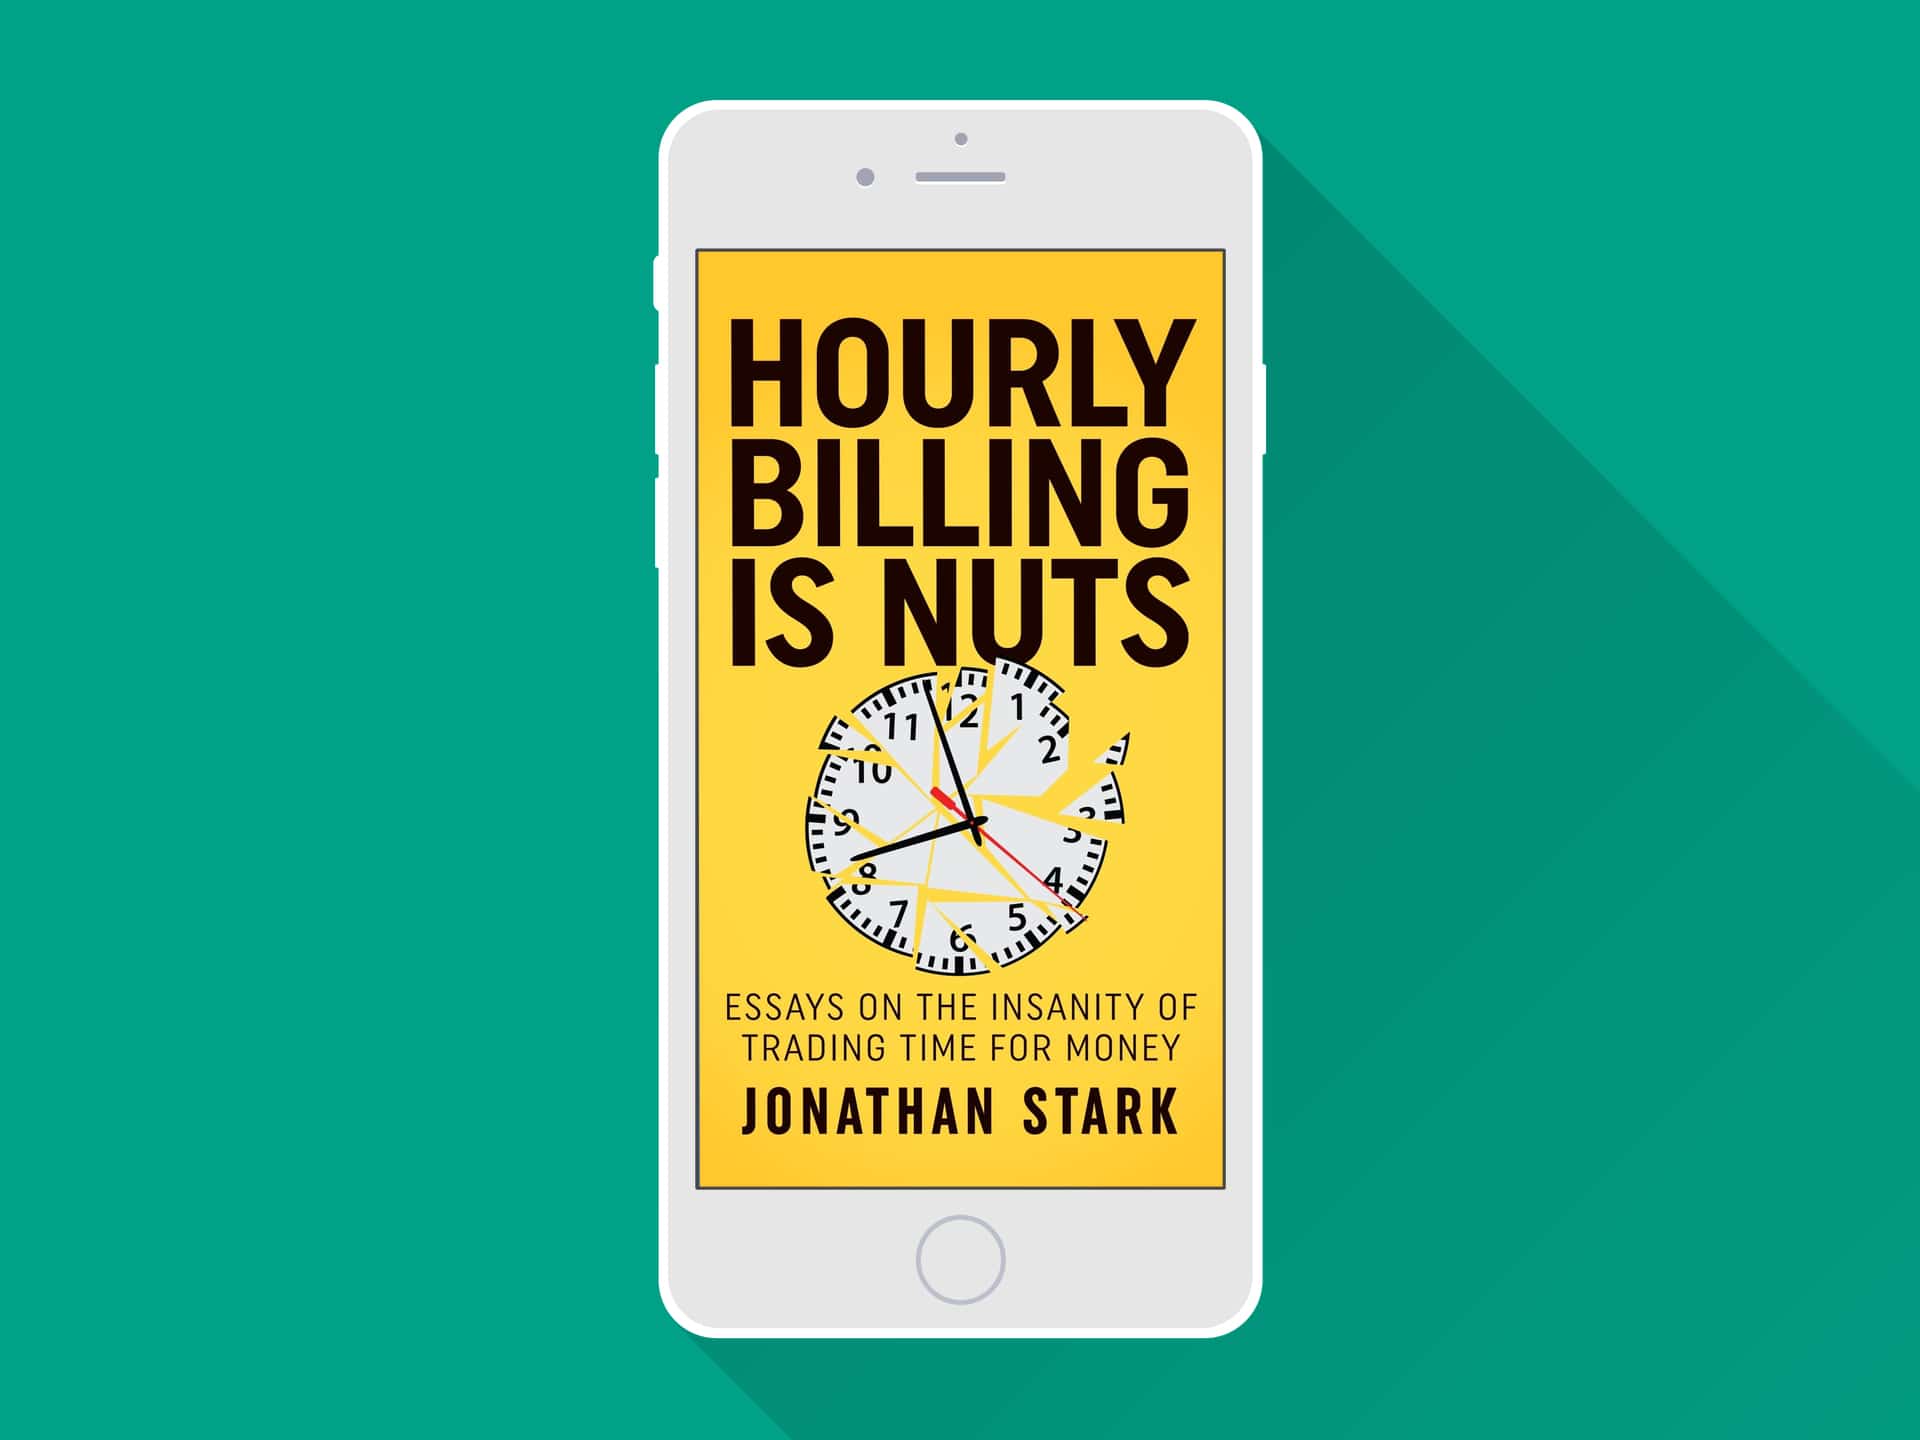 Hourly Billing is Nuts: 140 Word Review